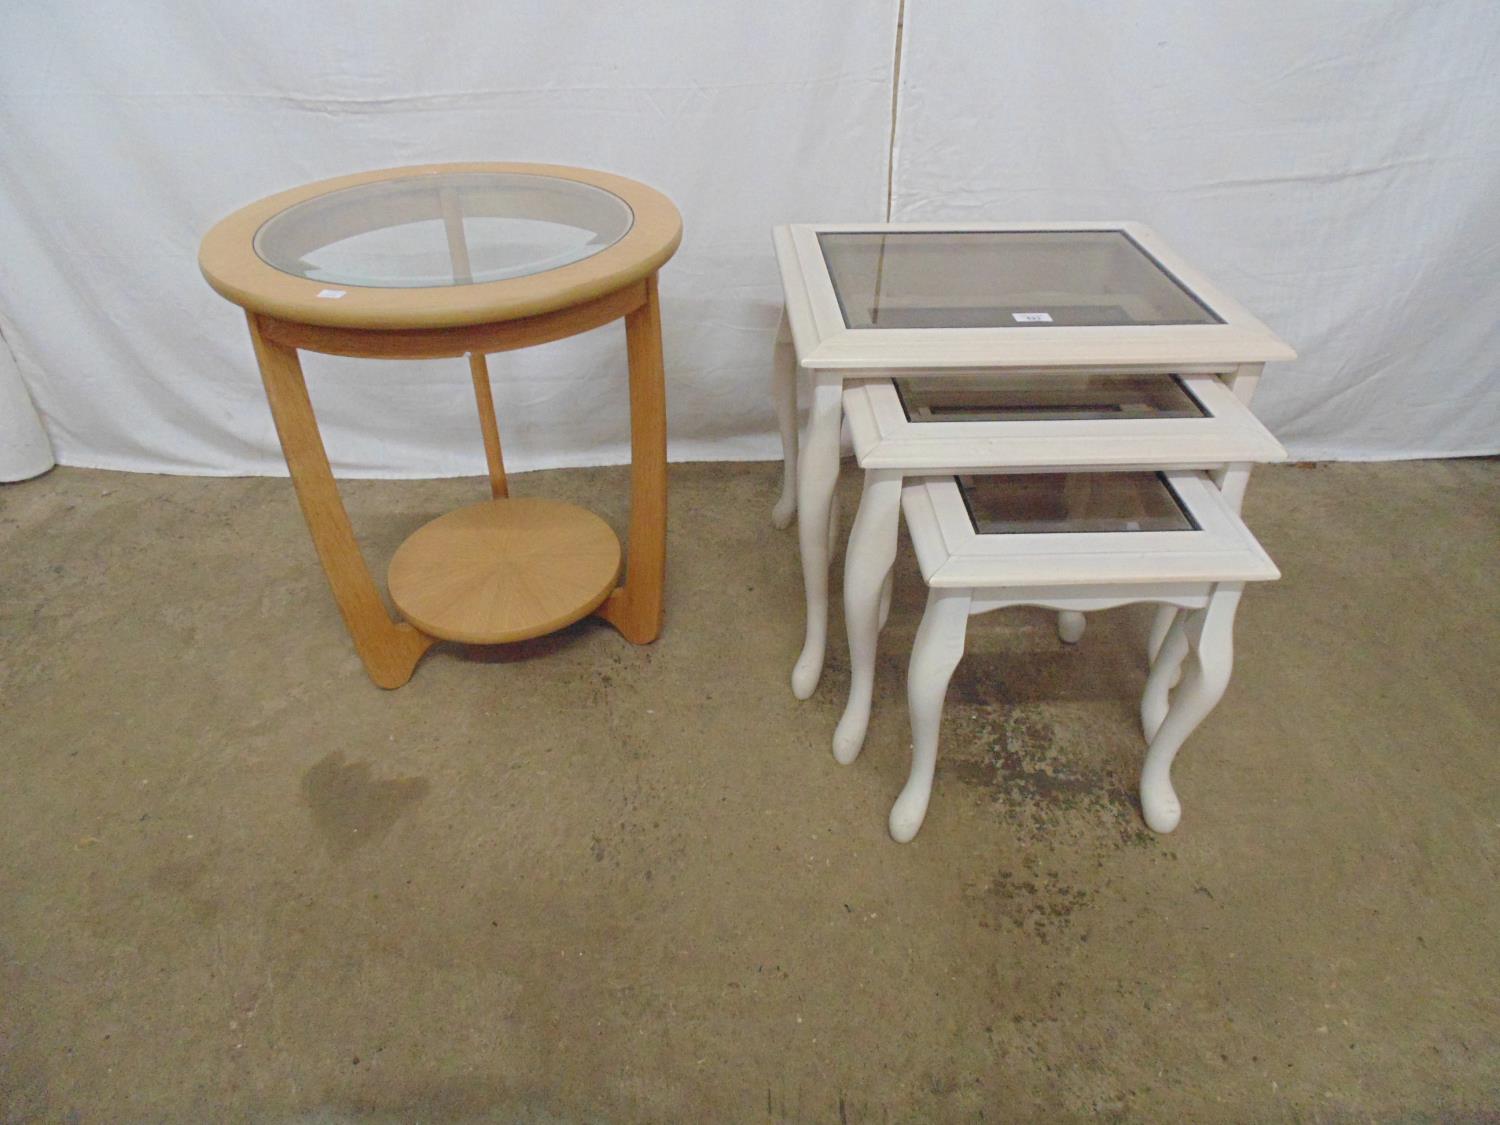 Painted nest of three glass topped tables, standing on cabriole legs - 51cm x 42cm x 47cm (